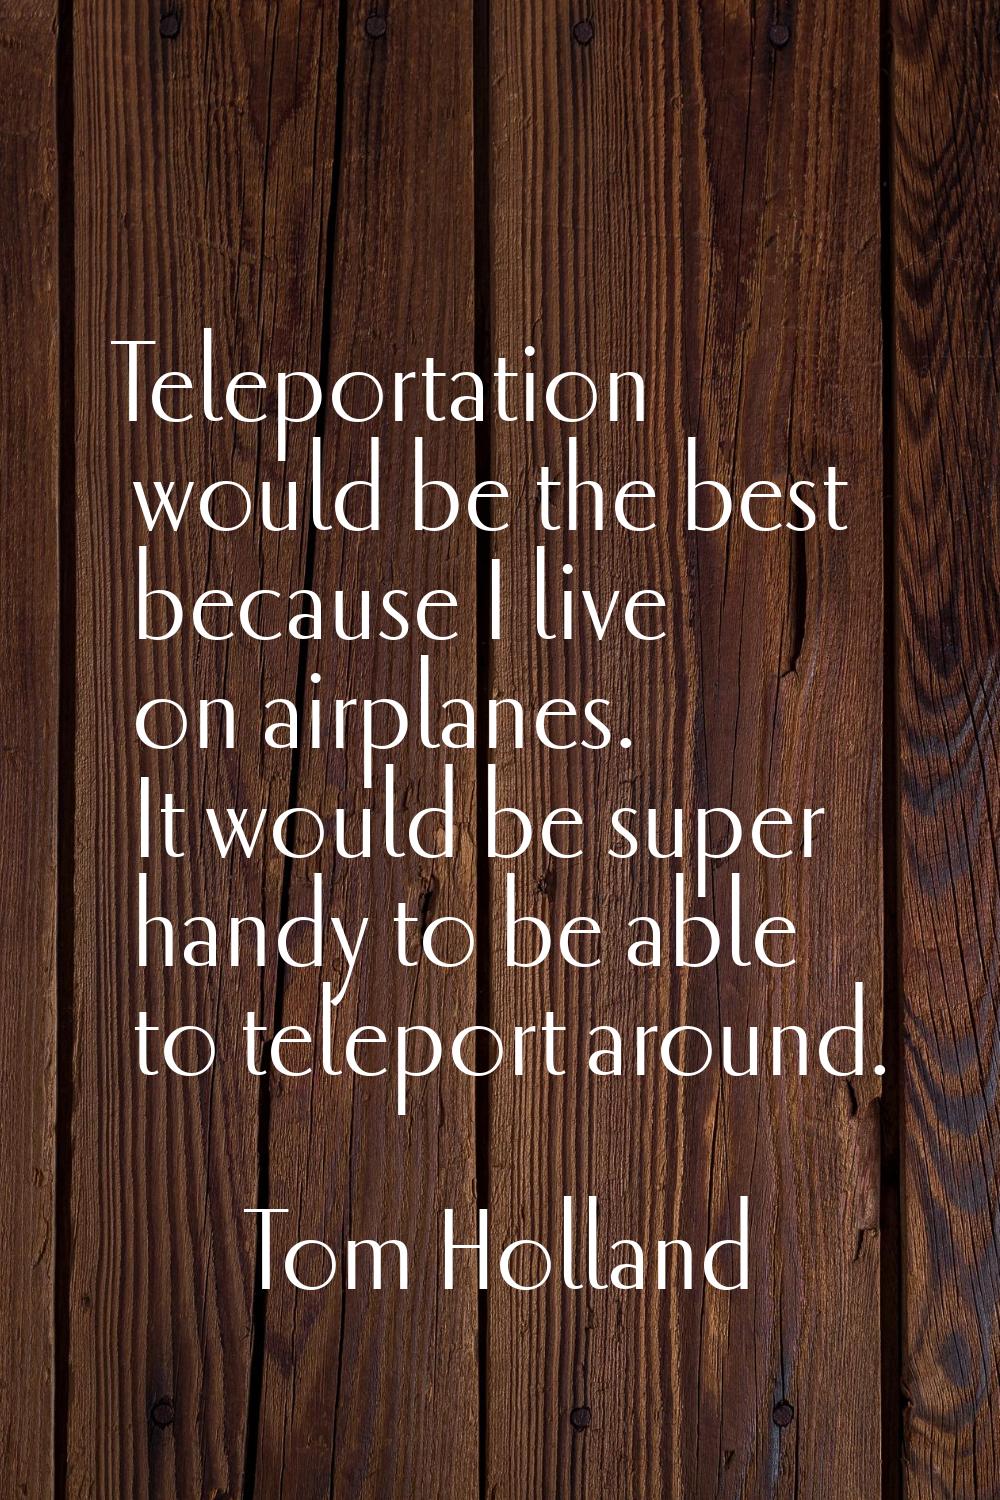 Teleportation would be the best because I live on airplanes. It would be super handy to be able to 